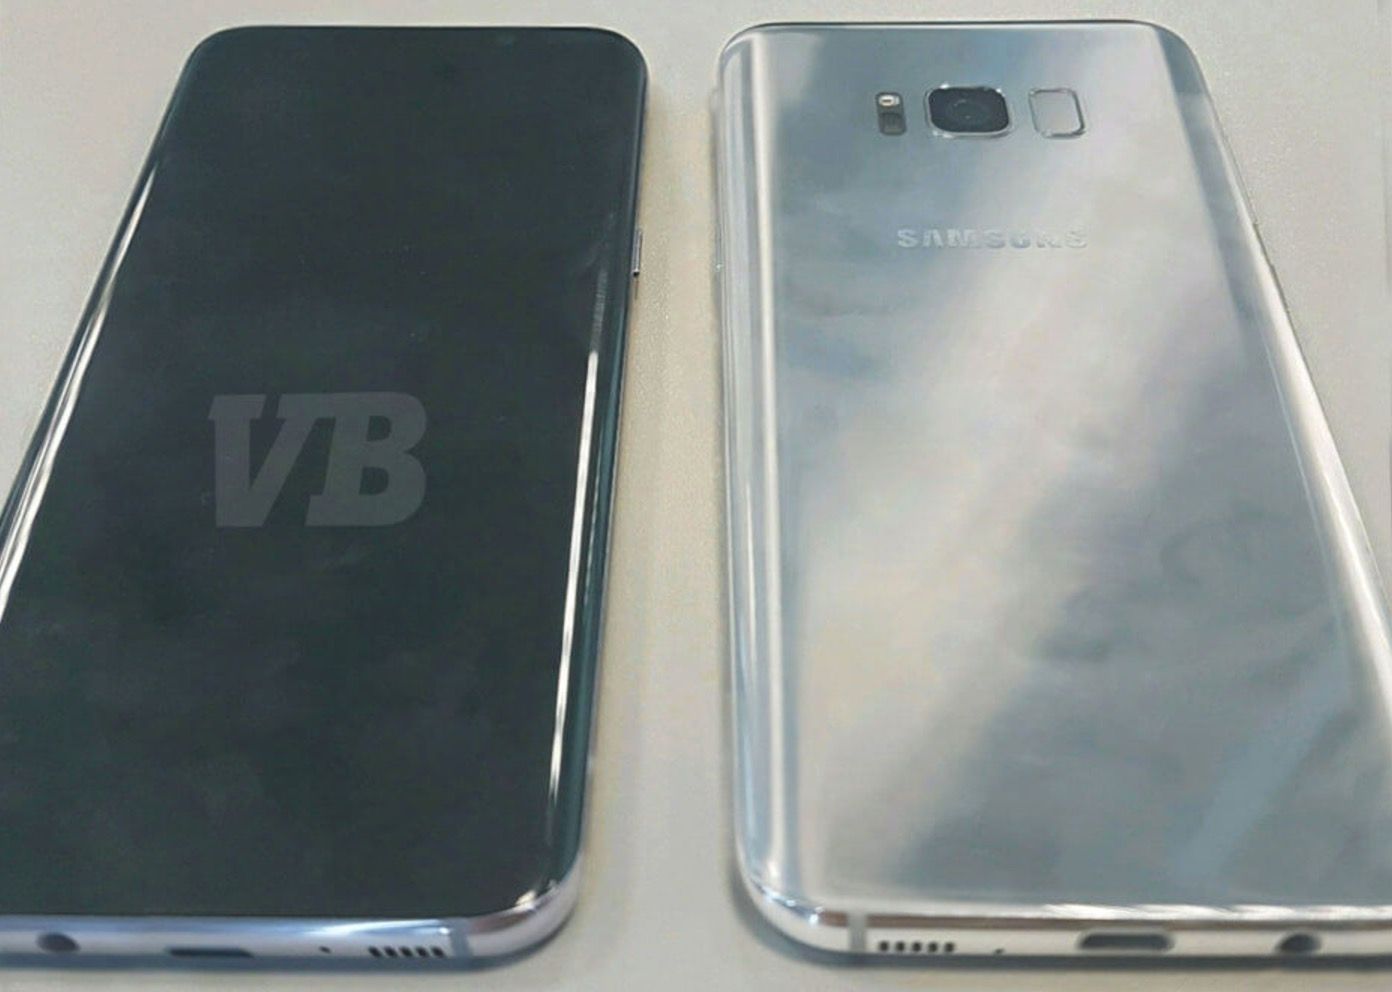 samsung galaxy s8 to launch 29 march huge leak and pic reveals all image 1